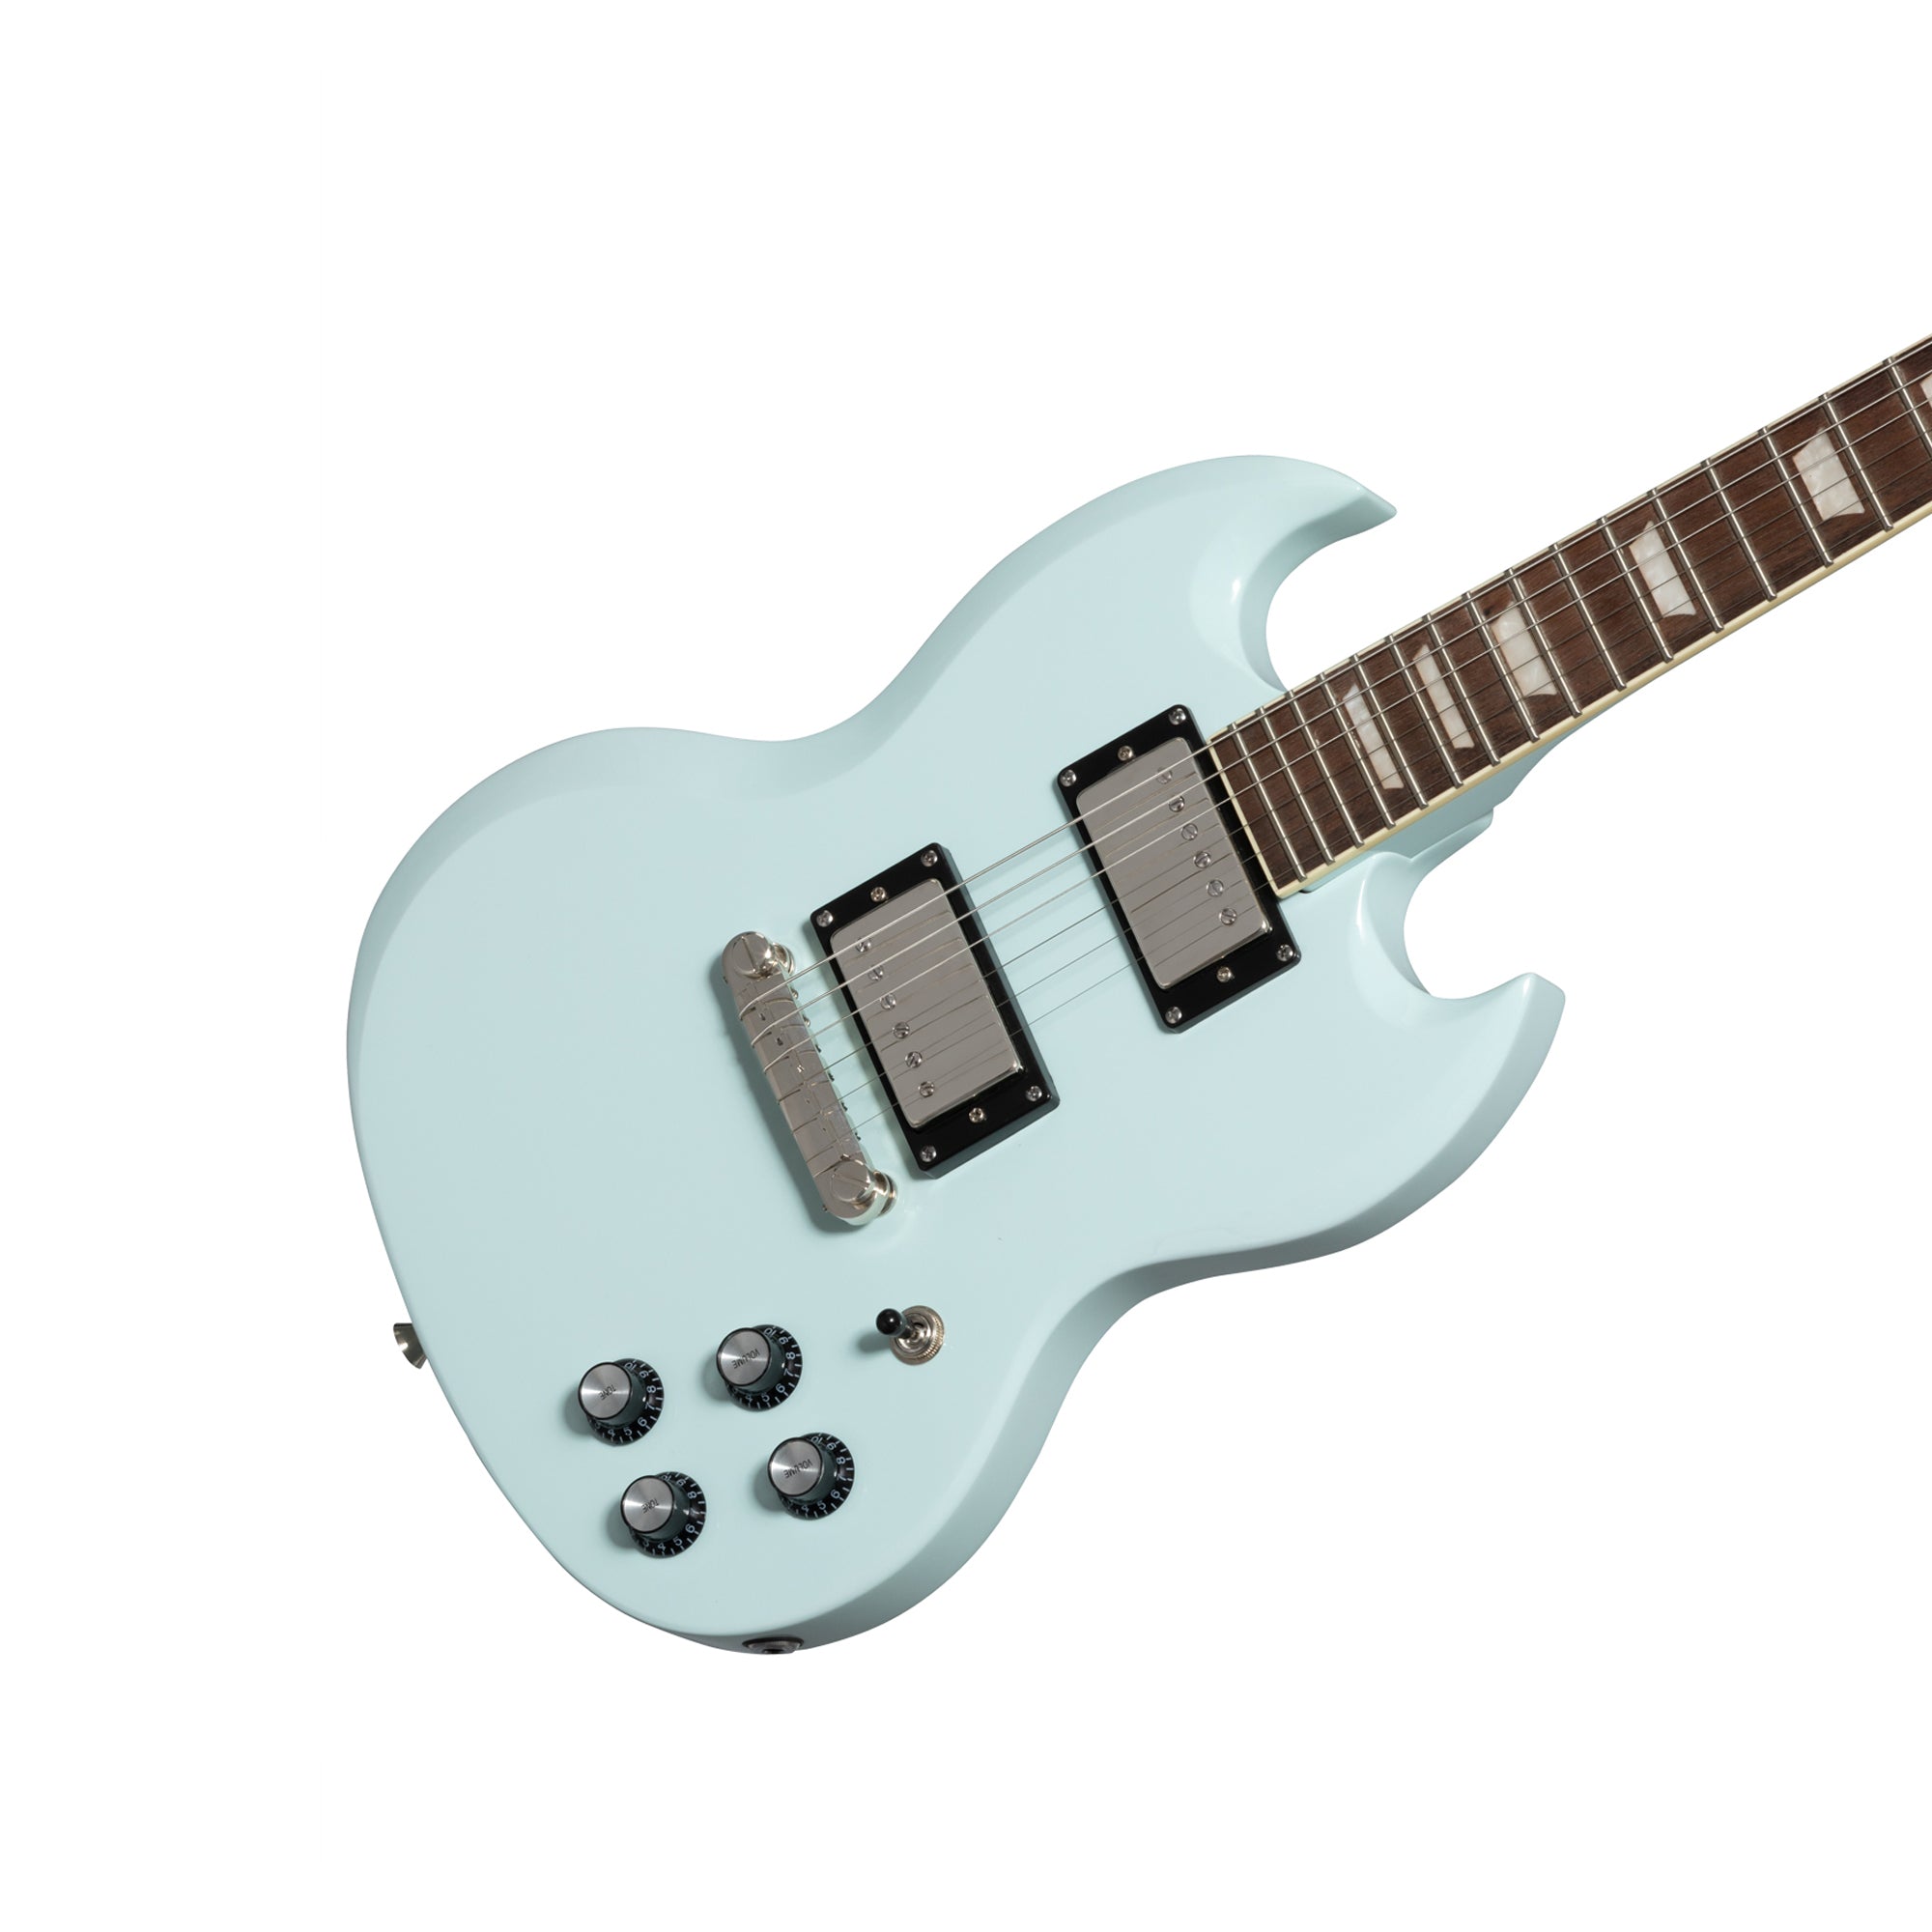 Epiphone ES1PPSGFBNH1 Power Players SG Ice Blue- Incl. Gig bag, Cable, Picks